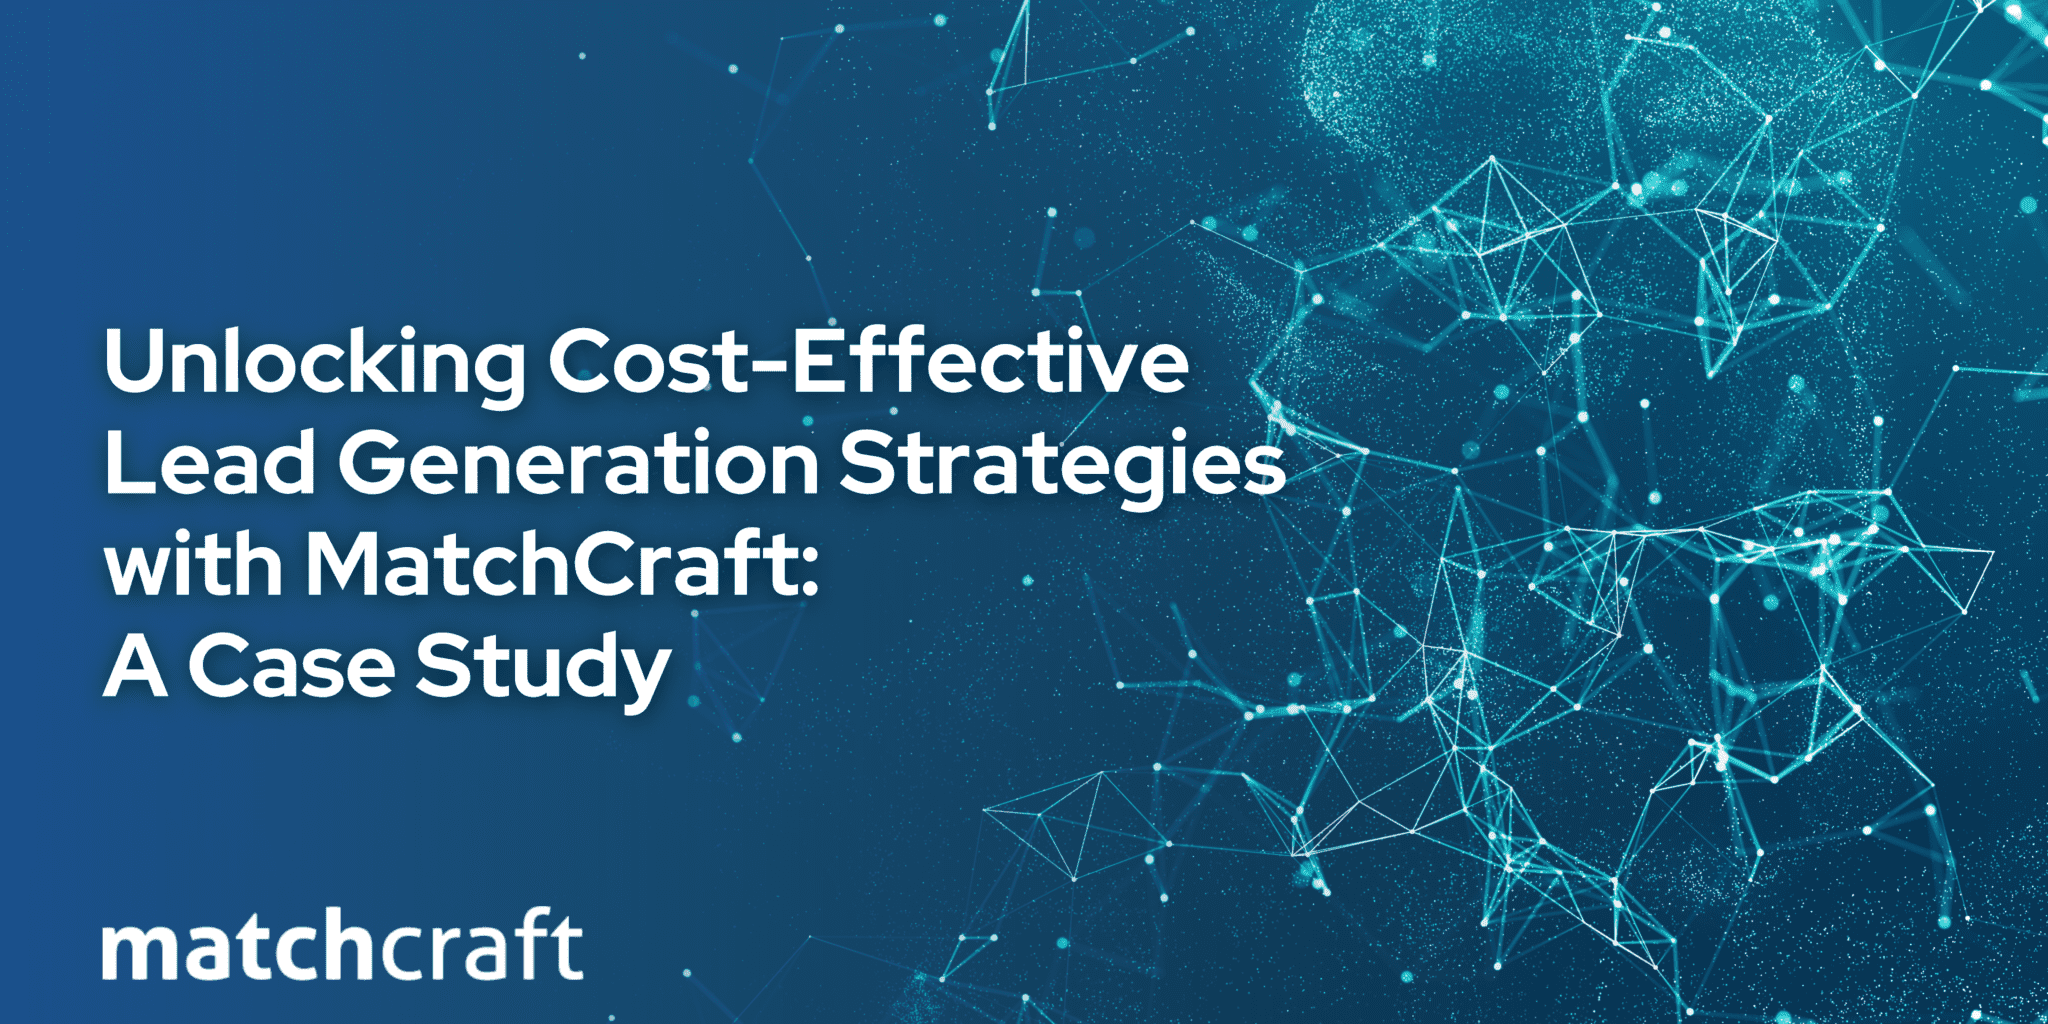 Unlocking Cost-Effective Lead Generation Strategies with MatchCraft: A Case Study